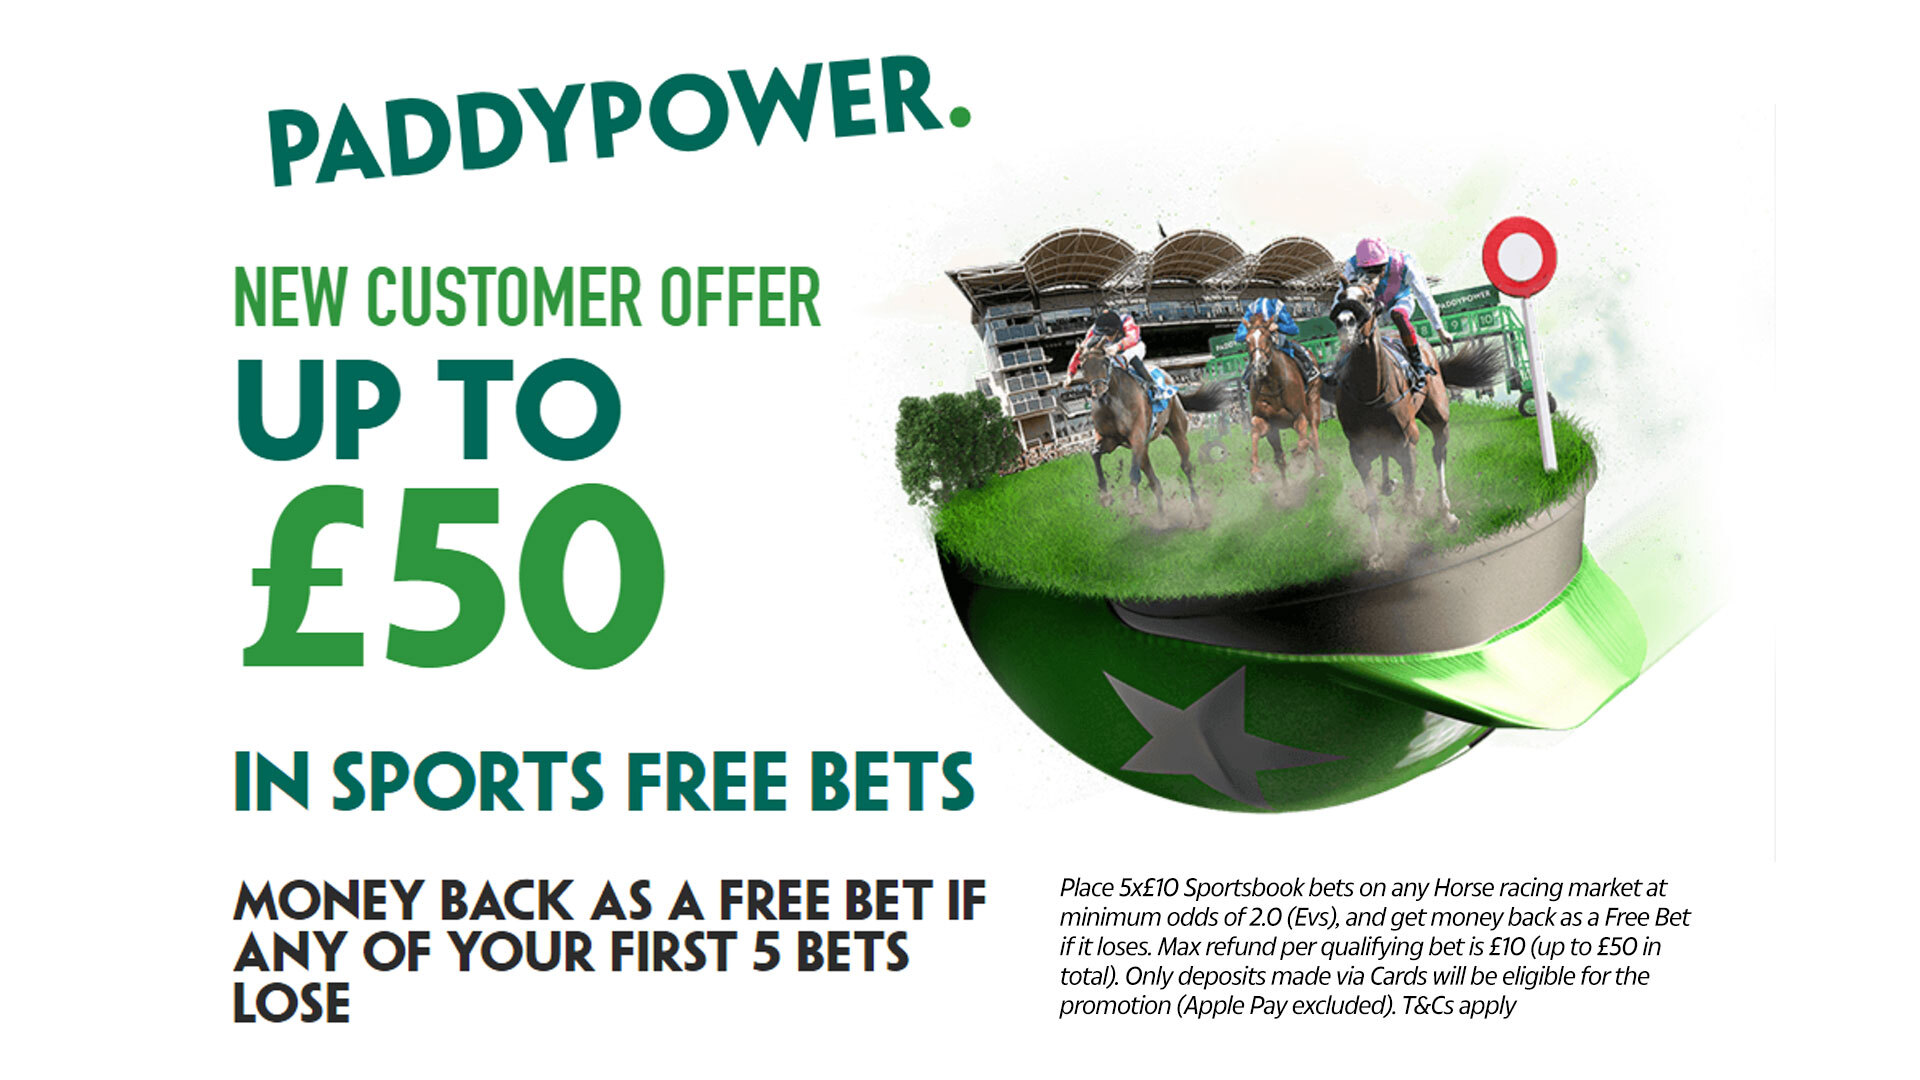 Get up to £50 back as free bets if any of your first five horse racing bets lose with Paddy Power offer